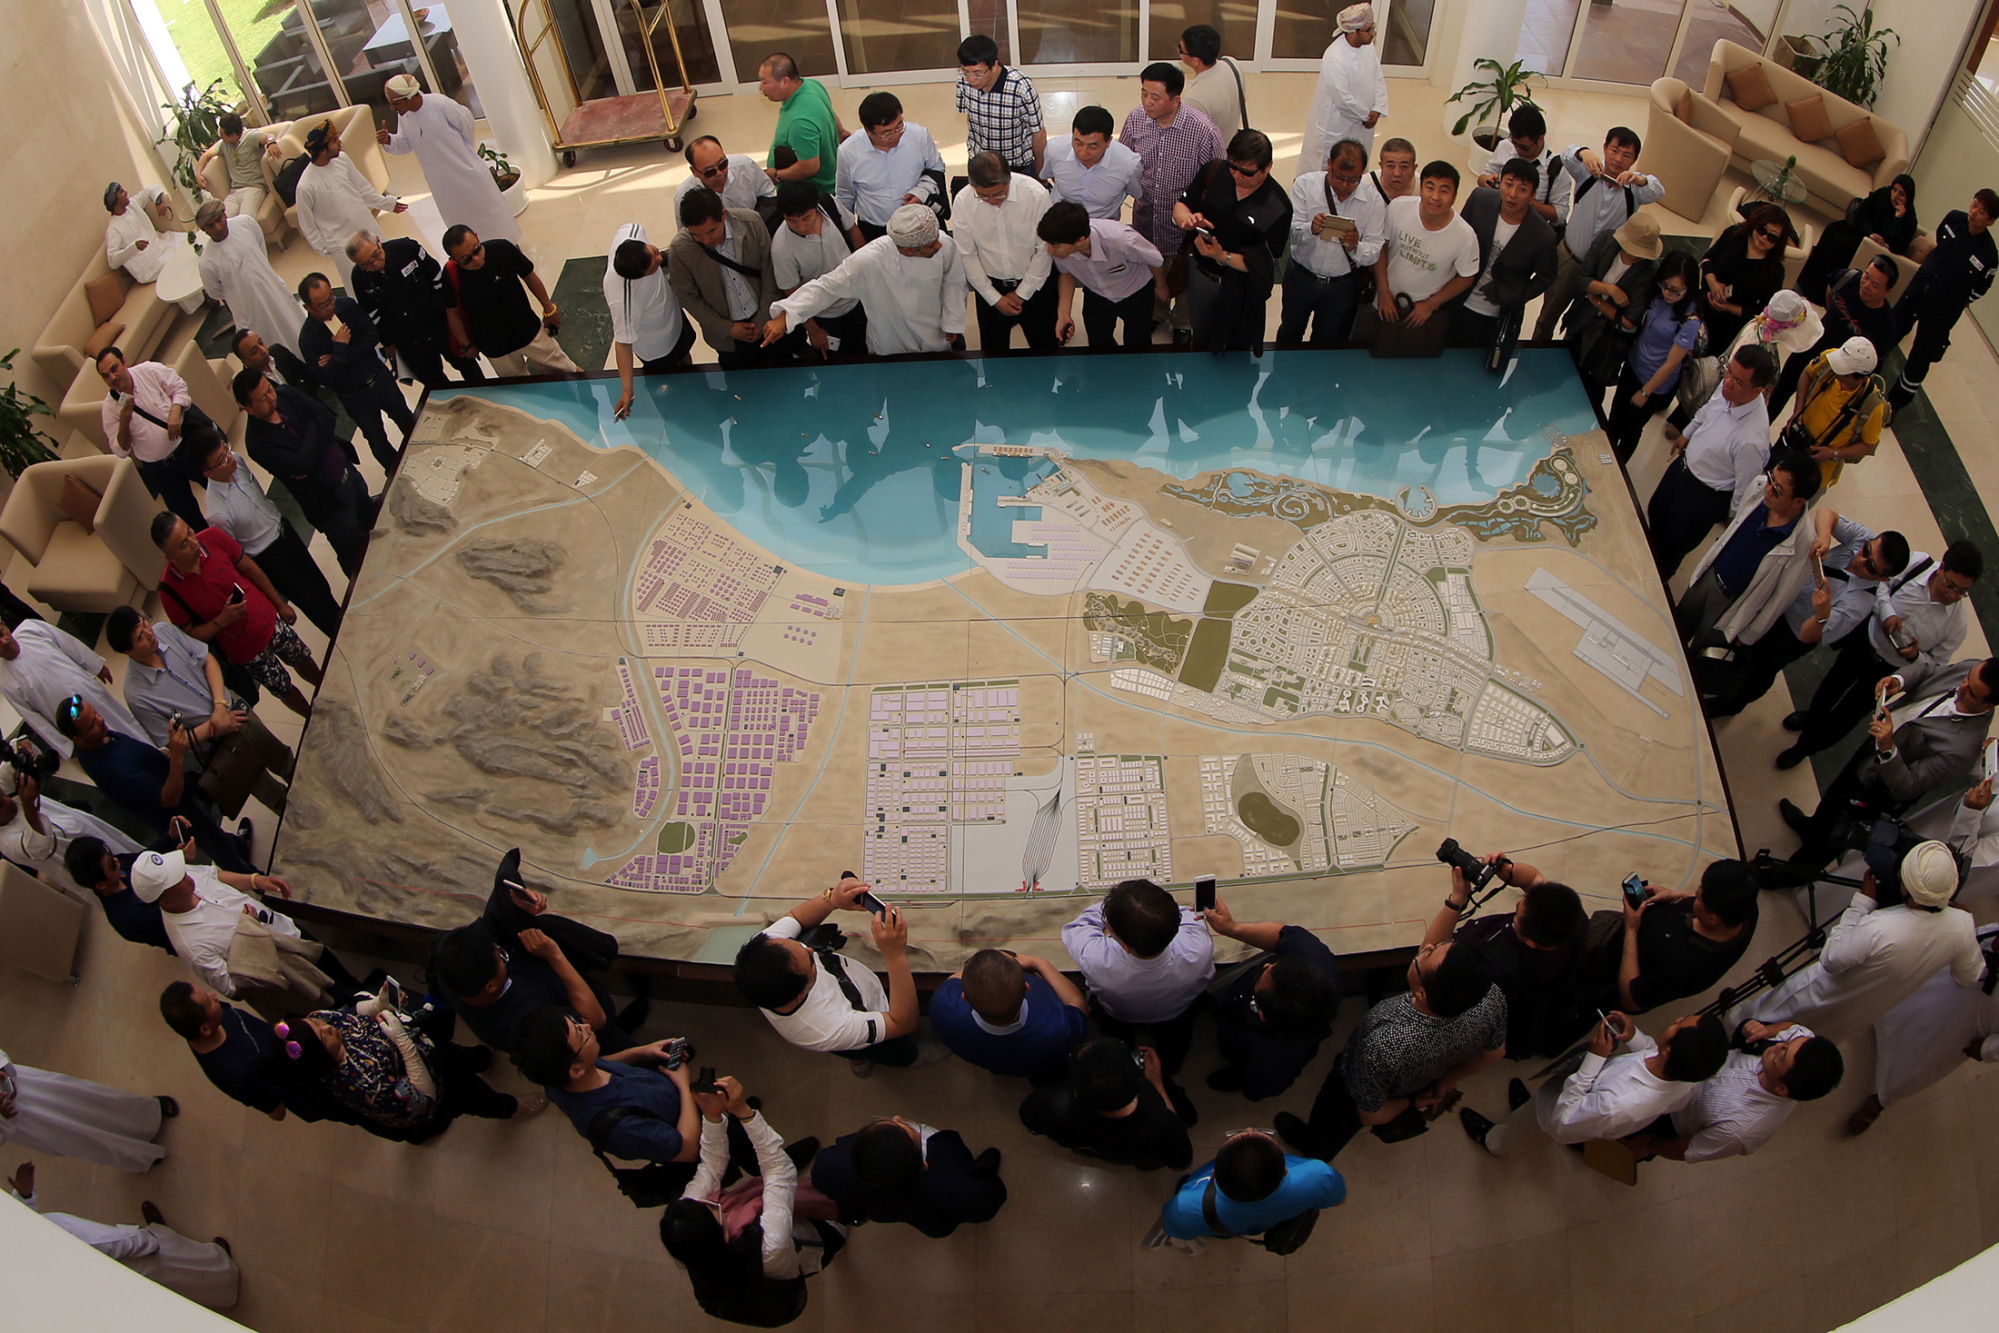 Investors look at a model of the proposed dock in&nbsp;Duqm, Oman,&nbsp;on May 24, 2016.